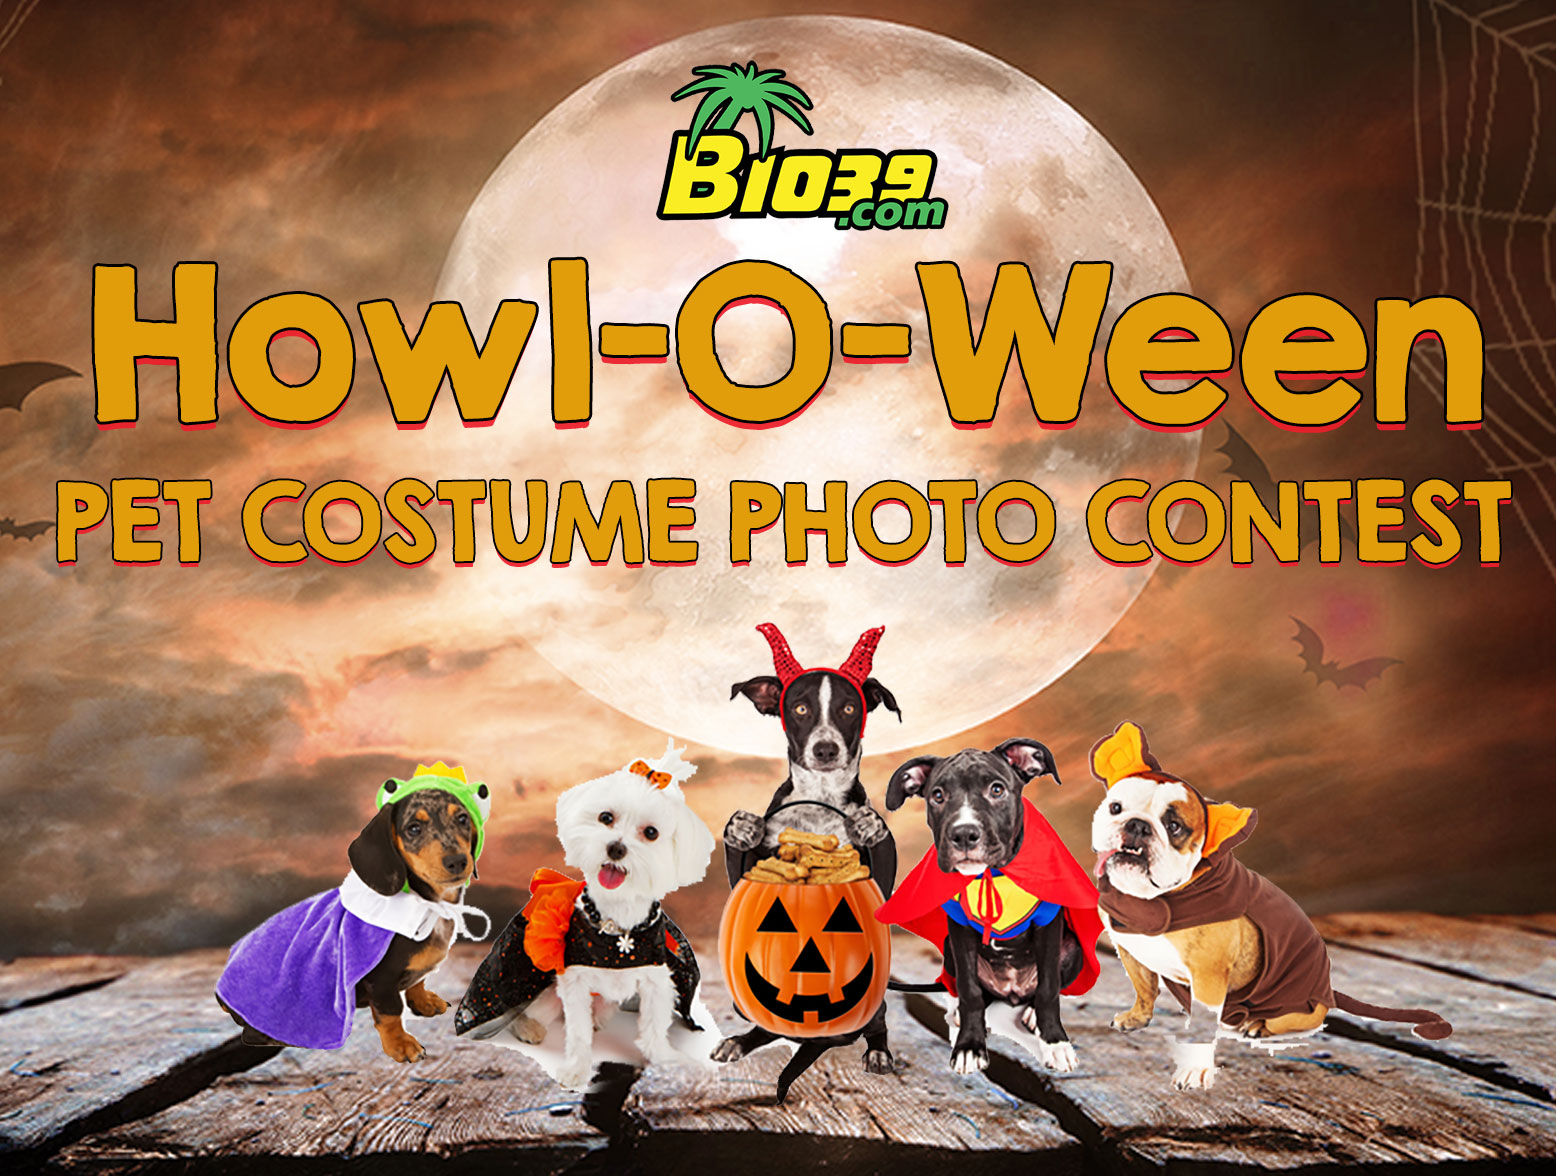 Howl-O-Ween pet costume competition